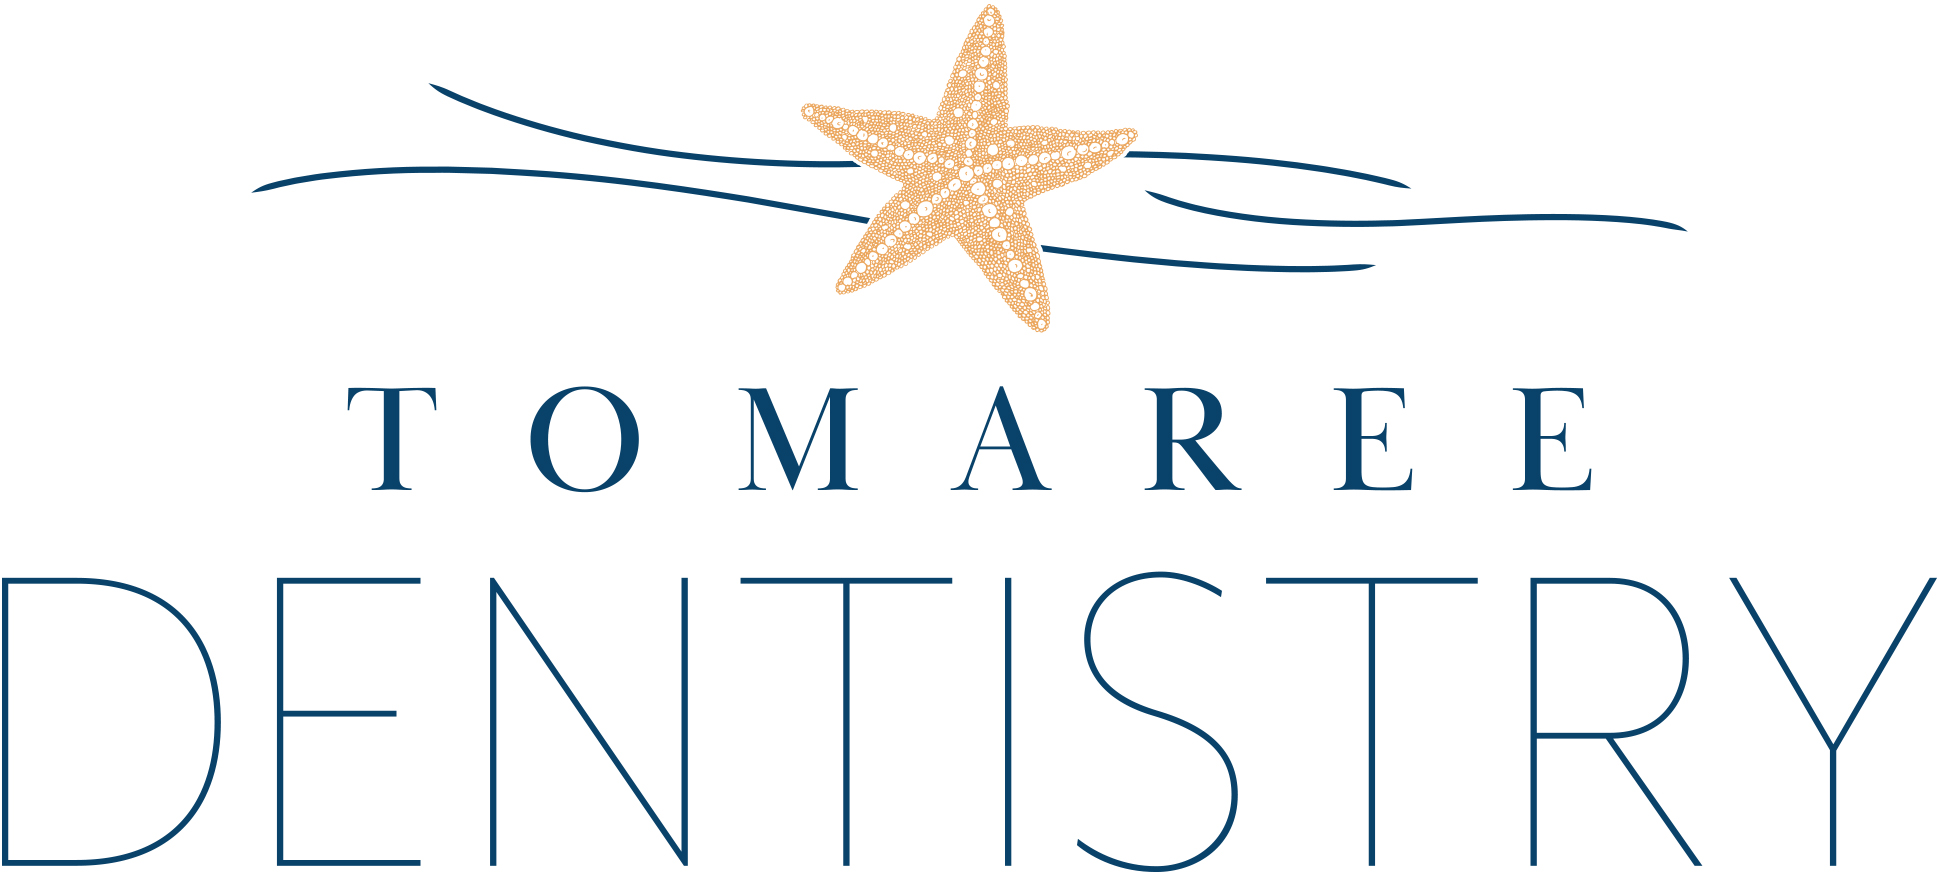 John Cropley Dentistry now called Tomaree Dentistry | dentist | 6 Tomaree St, Nelson Bay NSW 2315, Australia | 0249813114 OR +61 2 4981 3114